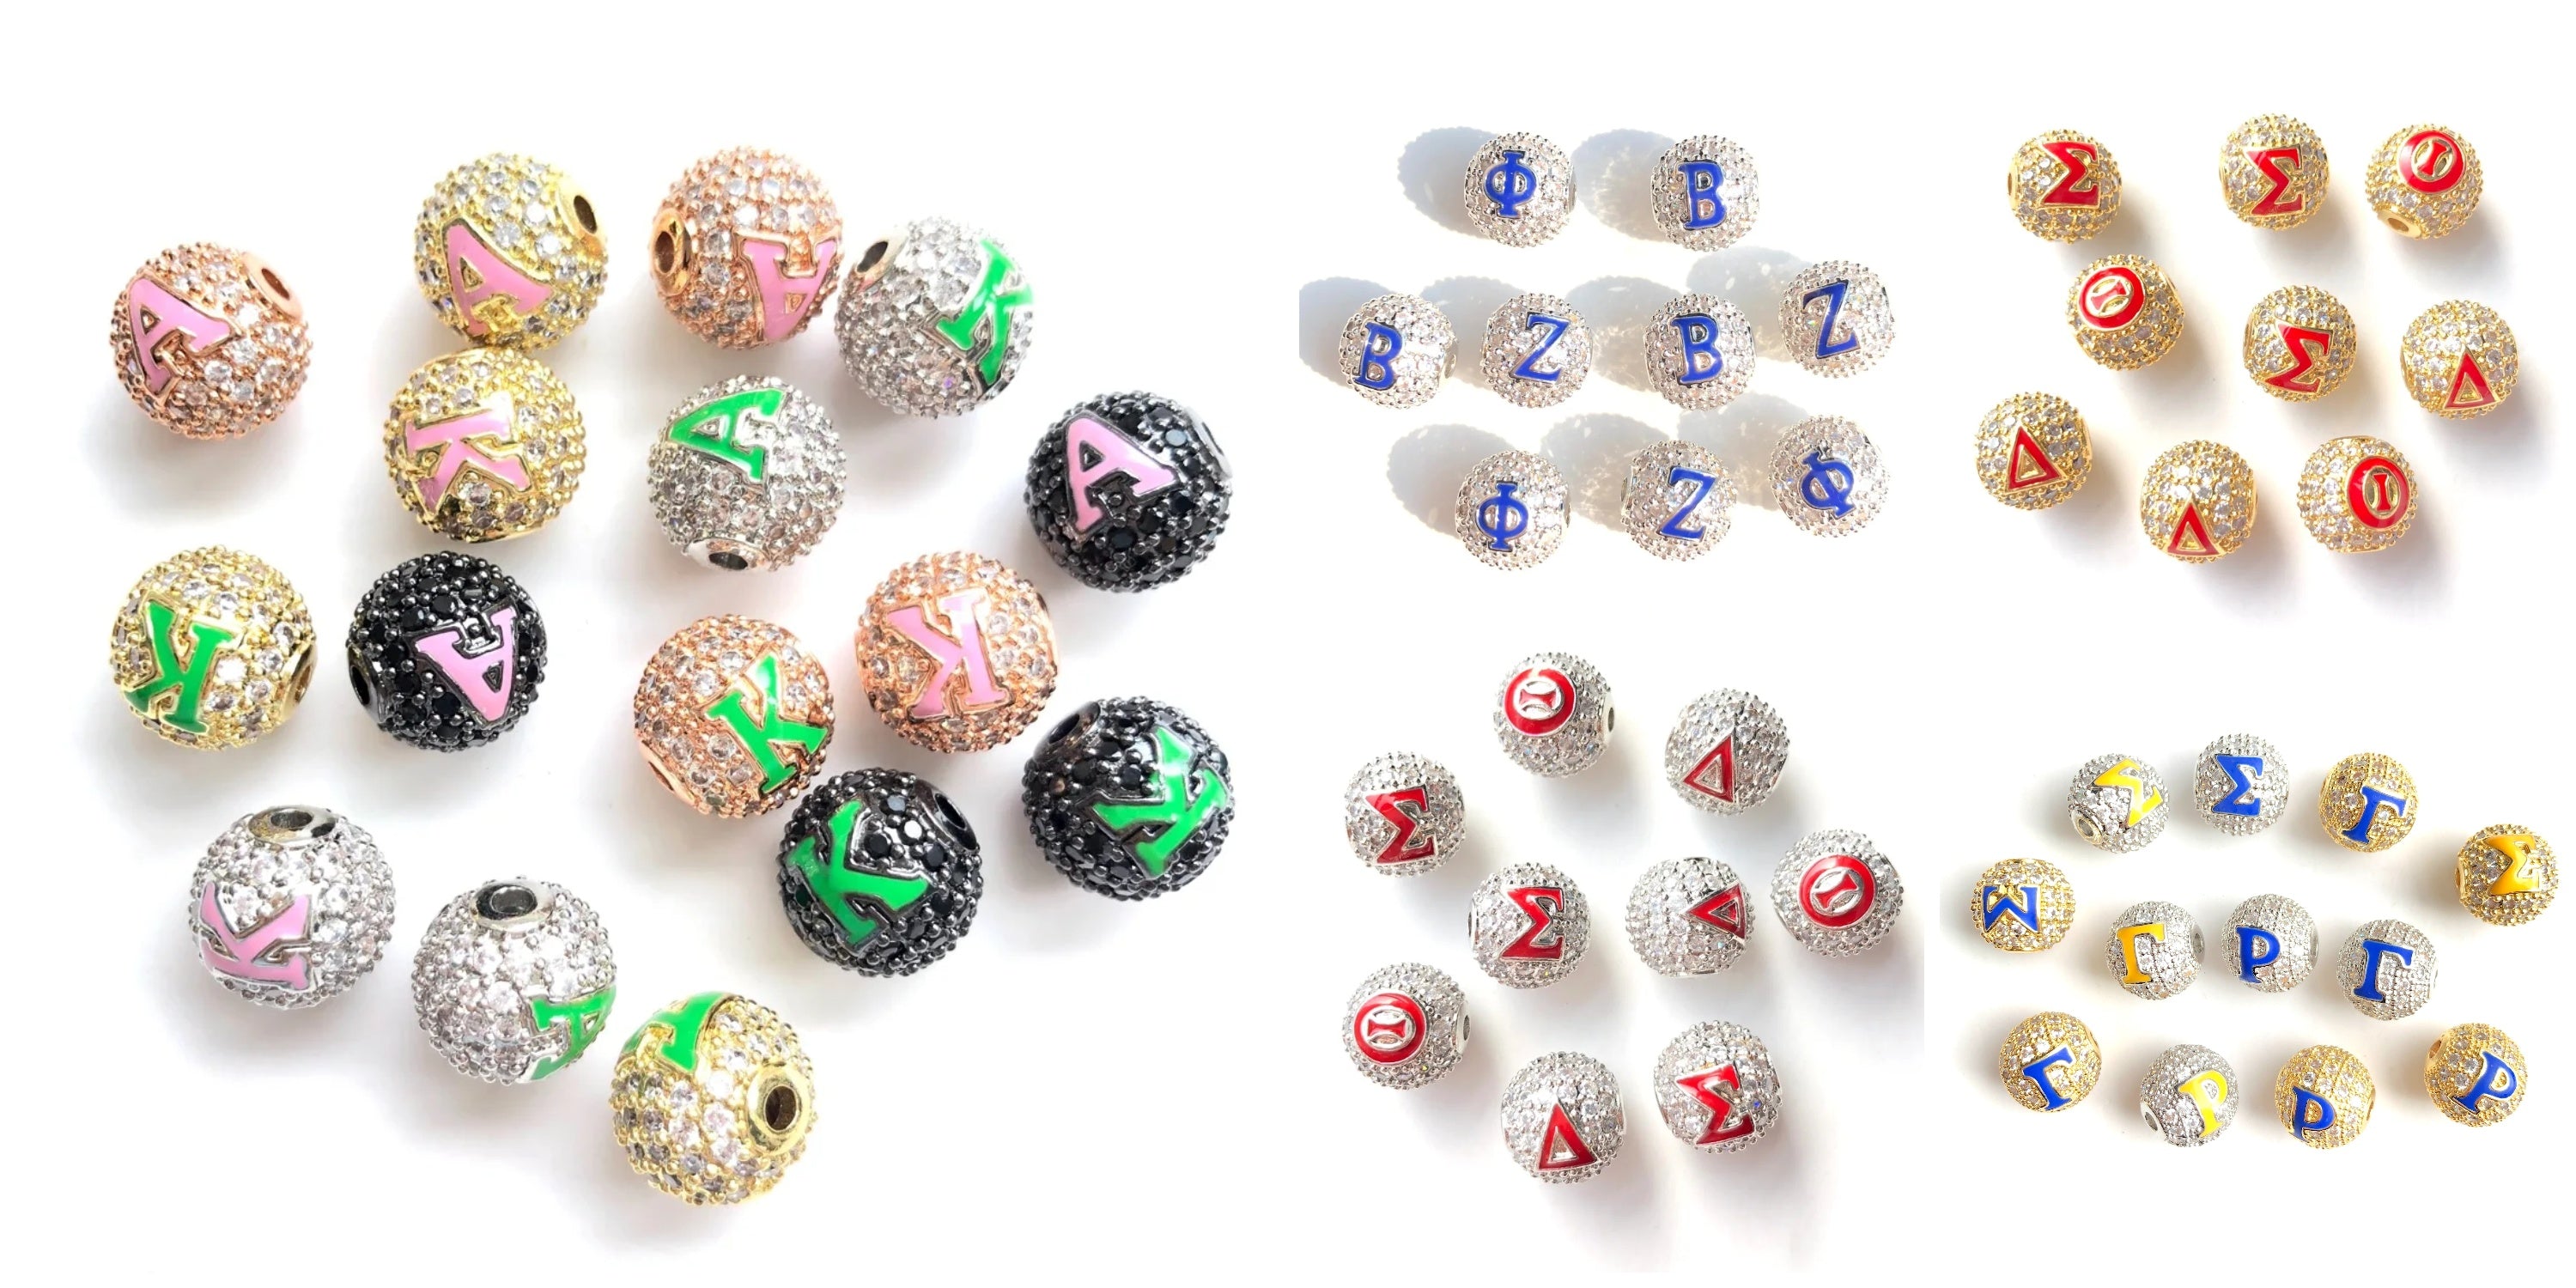 20pcs Stainless Steel Charm Beads Solid Ball Bead Charms Jewelry Making  Findings